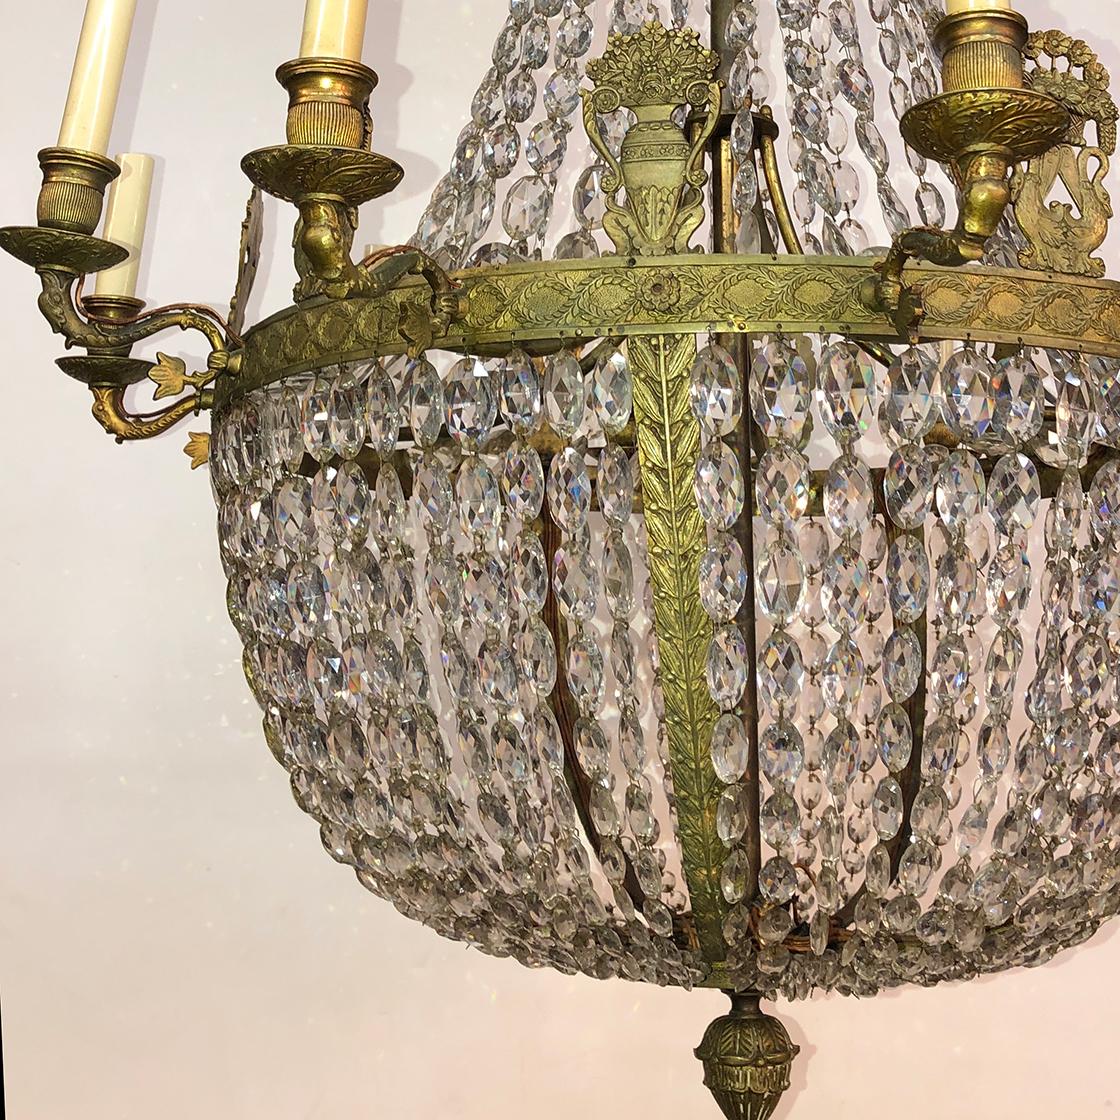 A French Empire crystal and bronze 10 light chandelier with elaborate palmettes, lyre mounts, and swan form arms.